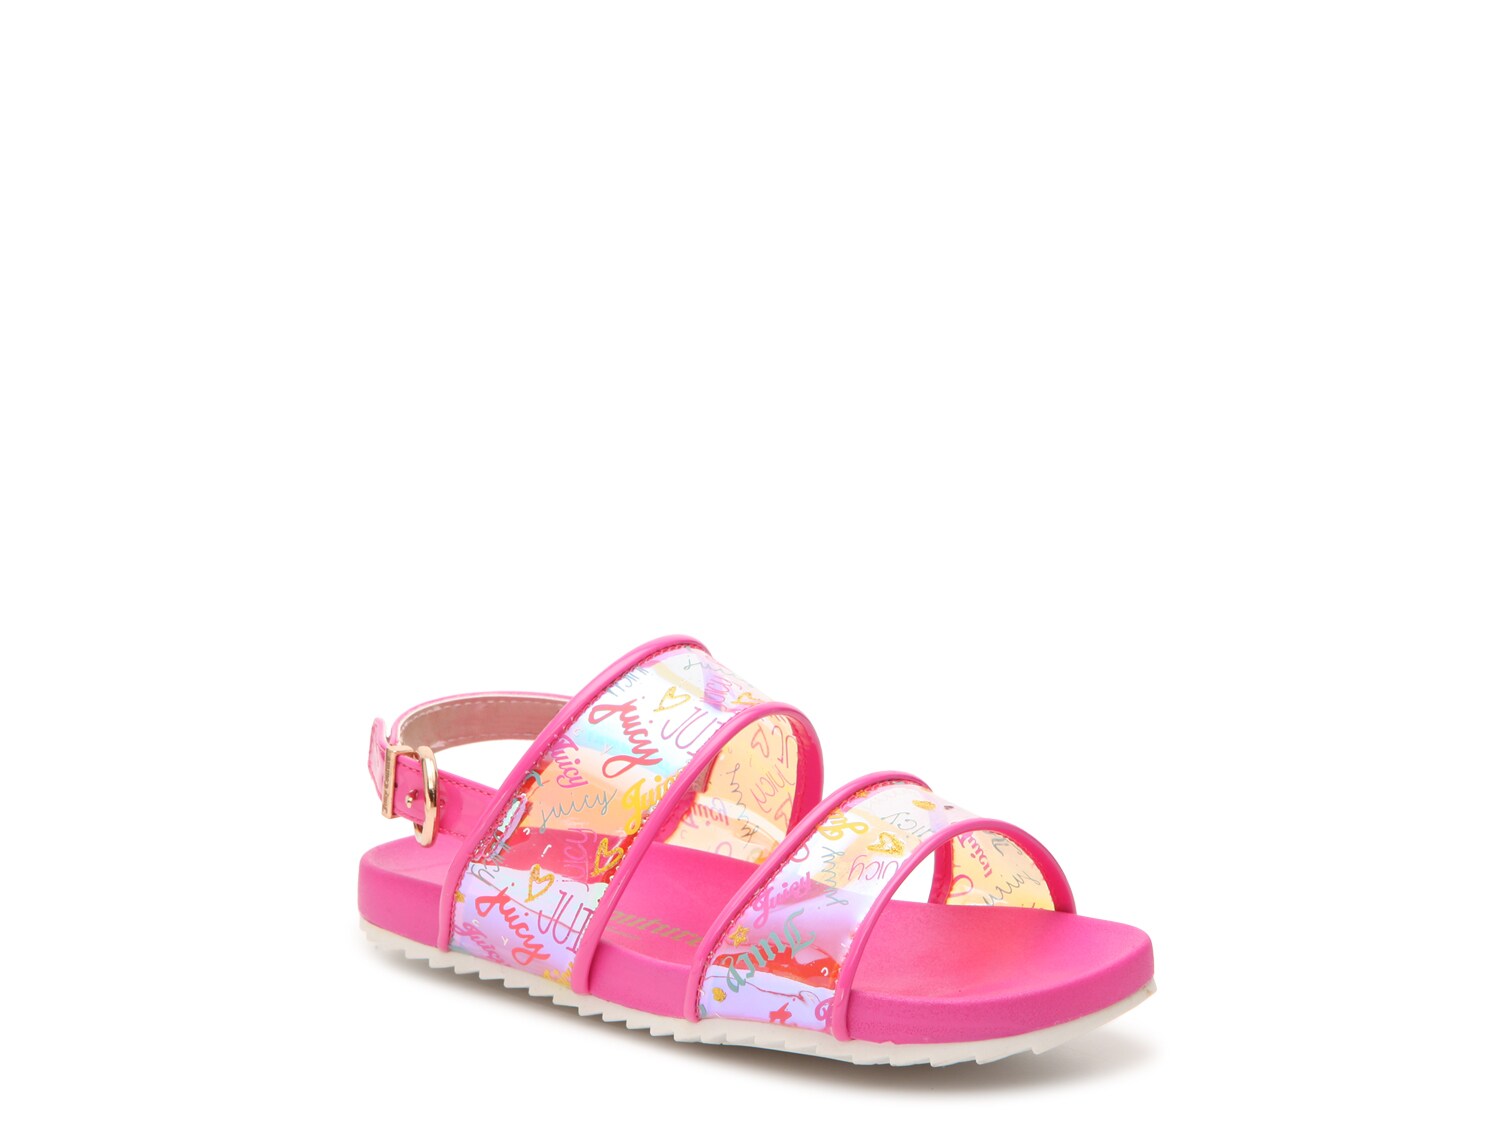 Juicy Couture Sunnyvale Sandal - Kids' - Free Shipping | DSW